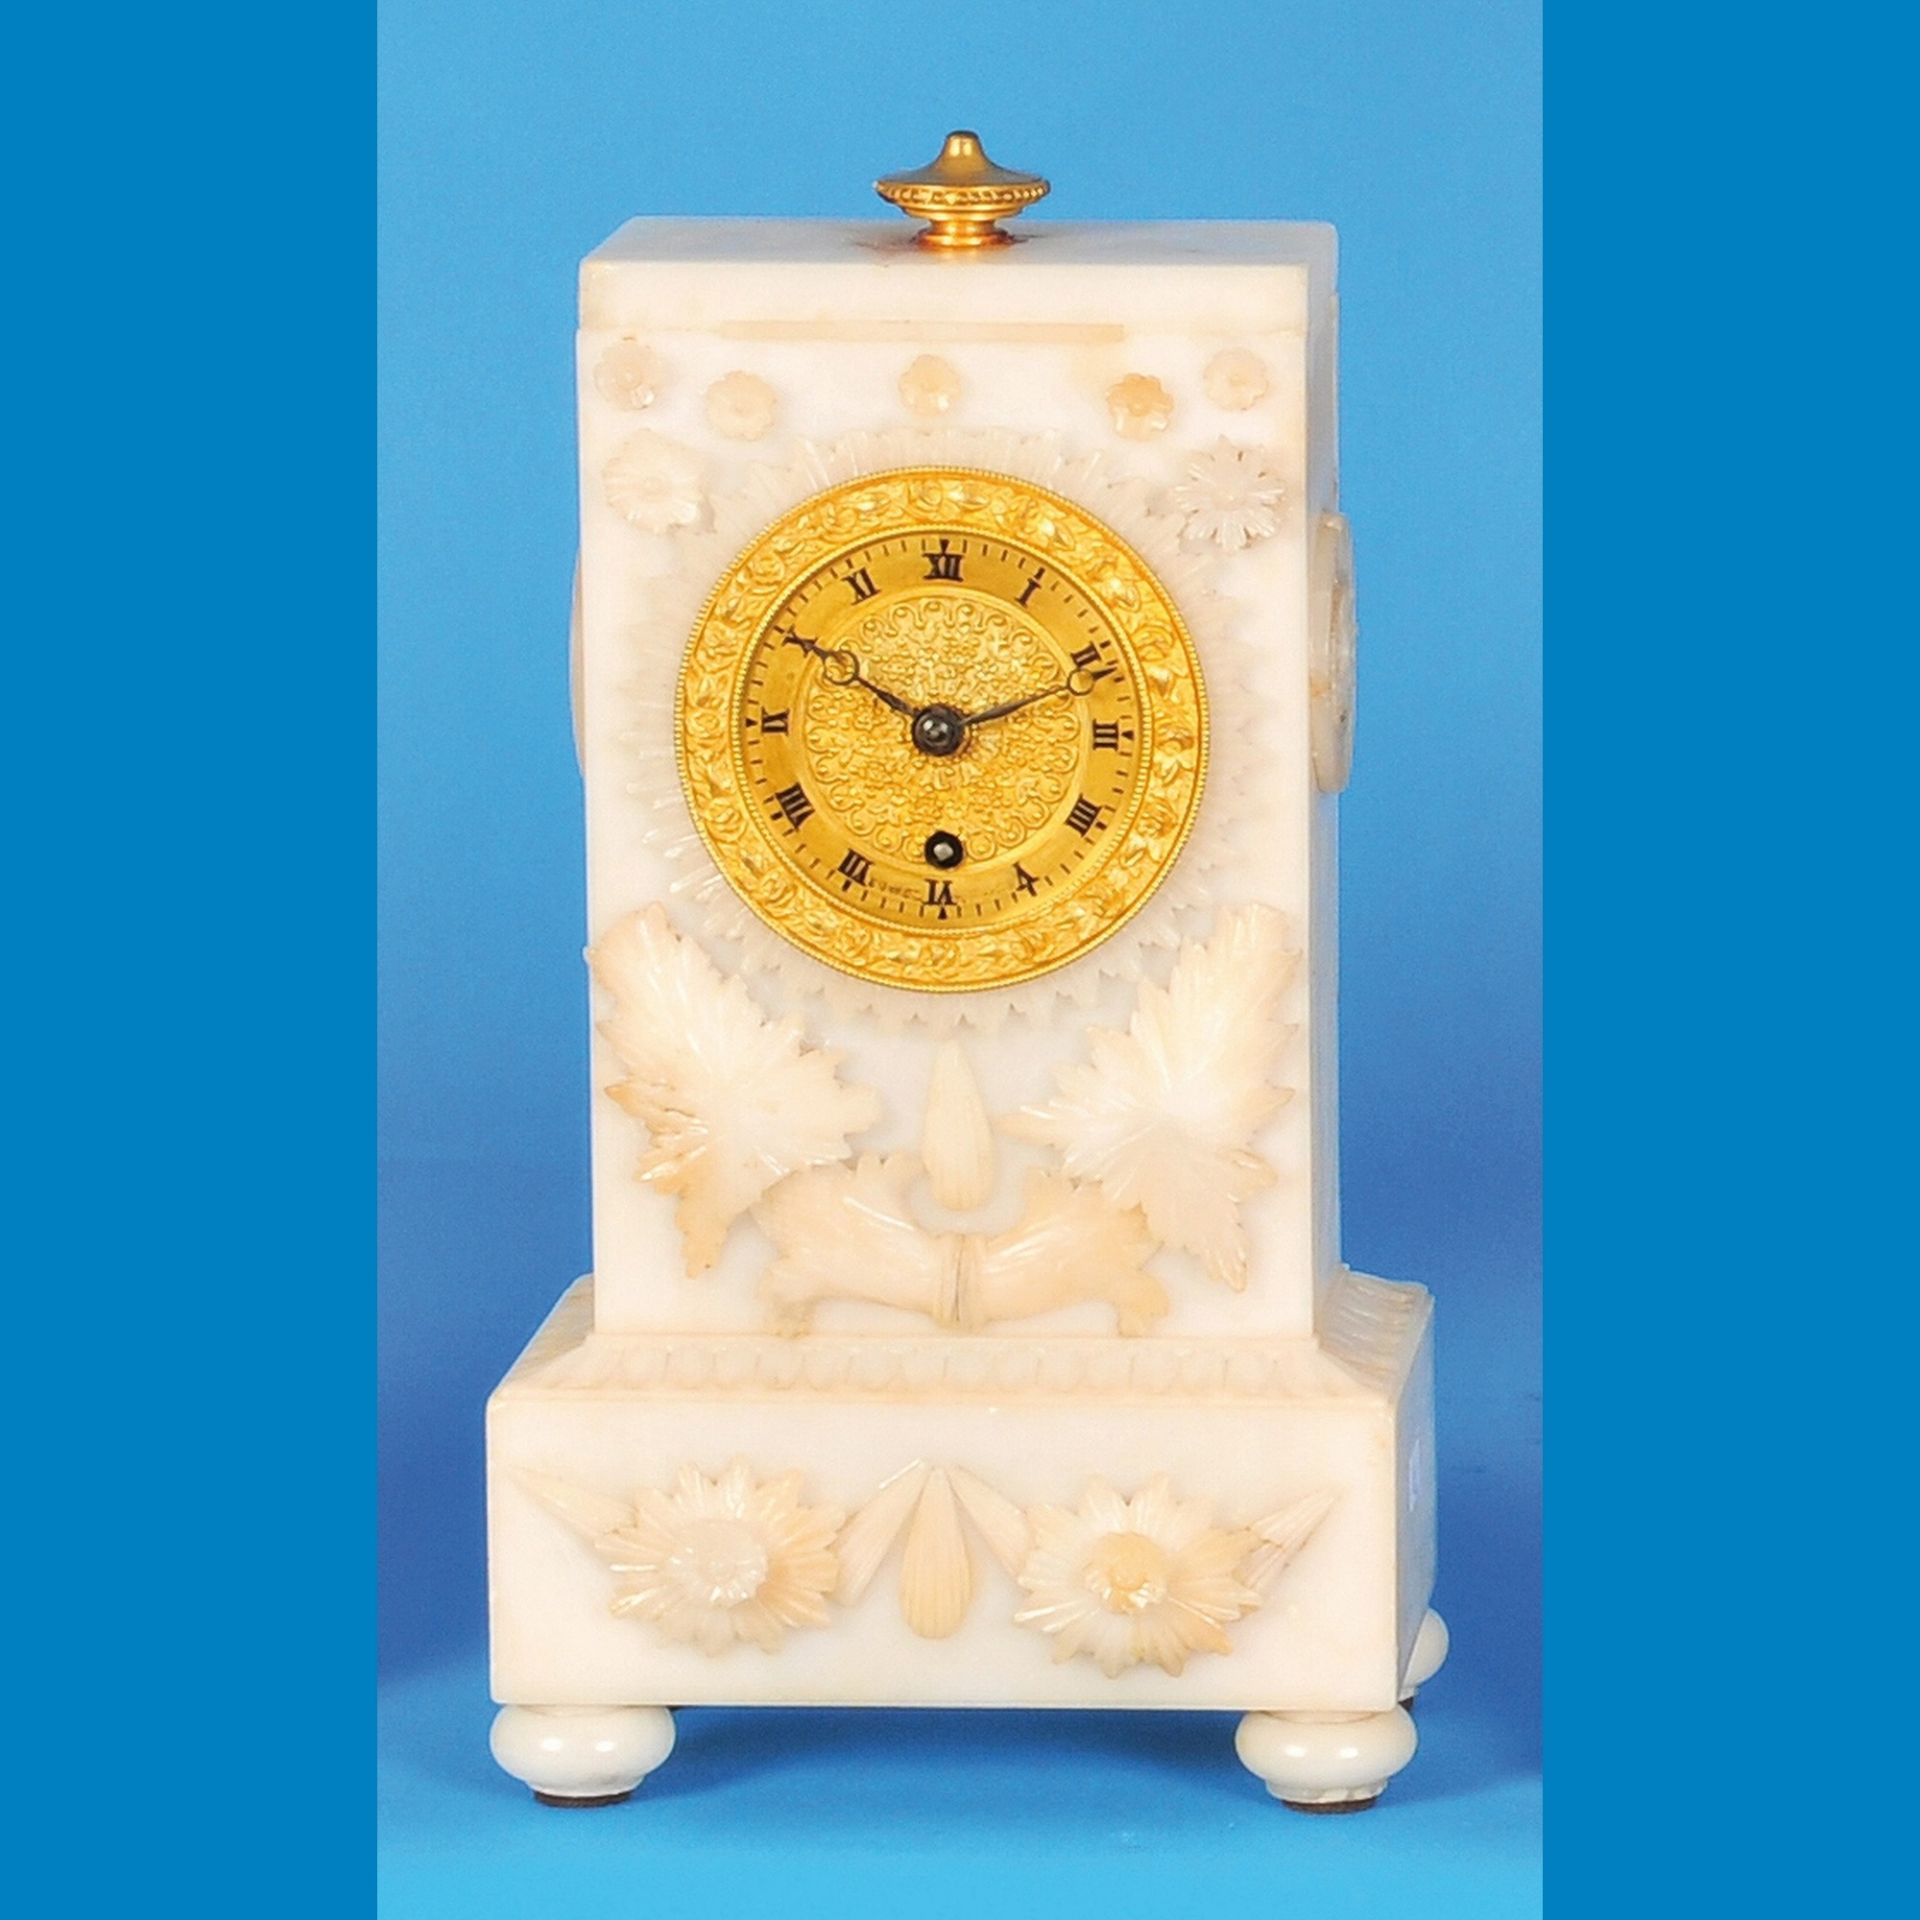 Small alabaster table clock with thread suspension of the pendulum